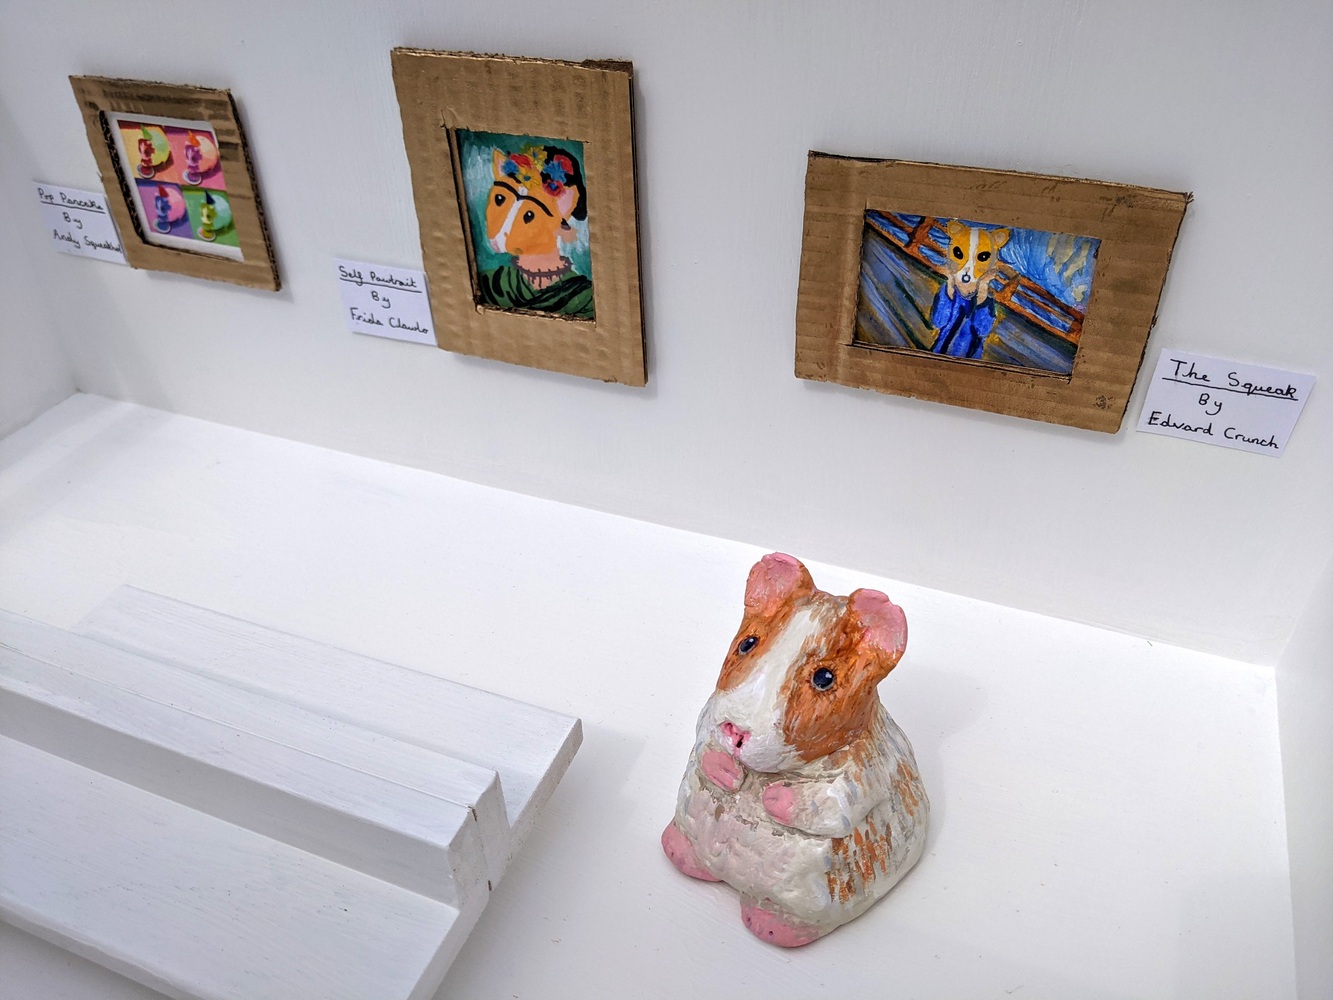 This artwork is a white box with an open top, featuring 6 small famed paintings. The paintings include homages to famous artworks, that have been reimagined with a hamsters face. The box is designed to look like a modern art gallery, with white walls and floor, and a white bench in the centre. There is a ceramic hamster, painted white with an orangey brown head in the gallery gazing at one of the artworks. There are plaques with the new names of the paintings underneath. These include The Squeak (aka The Scream), Self Pawtrait (A Frida Kahlo homage), Pop Pancake (in the style of Andy Warhol), Pancake with the Pearl Earring (in the style of Girl with the Pearl Earring), Small Sunflowers and The Mona Whister (in the style of The Mona Lisa).